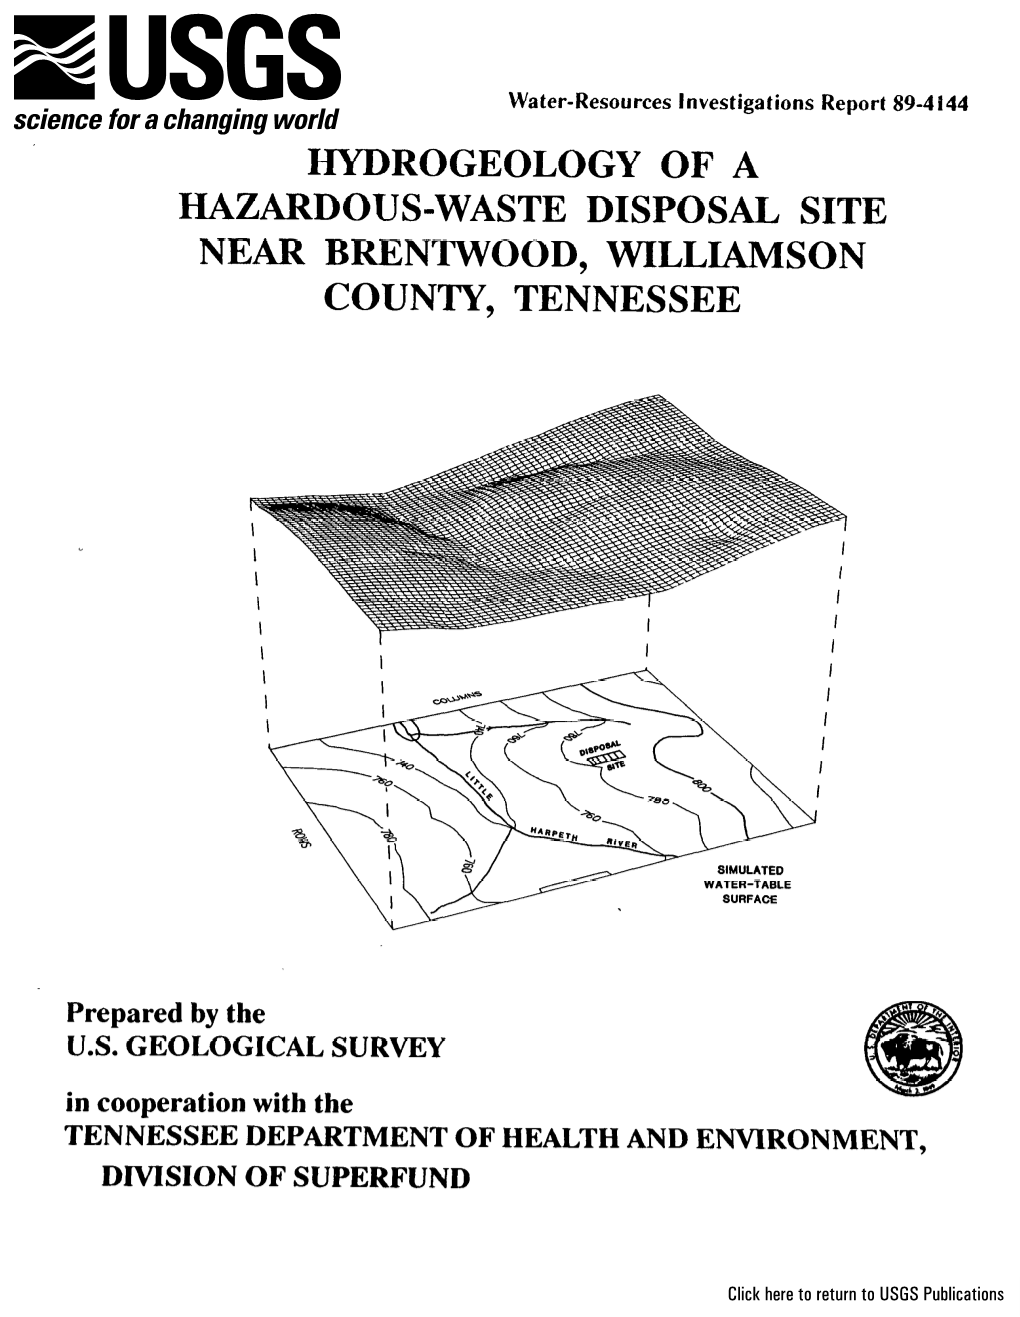 Hydrogeology of a Hazardous-Waste Disposal Site Near Brentwood, Williamson County, Tennessee